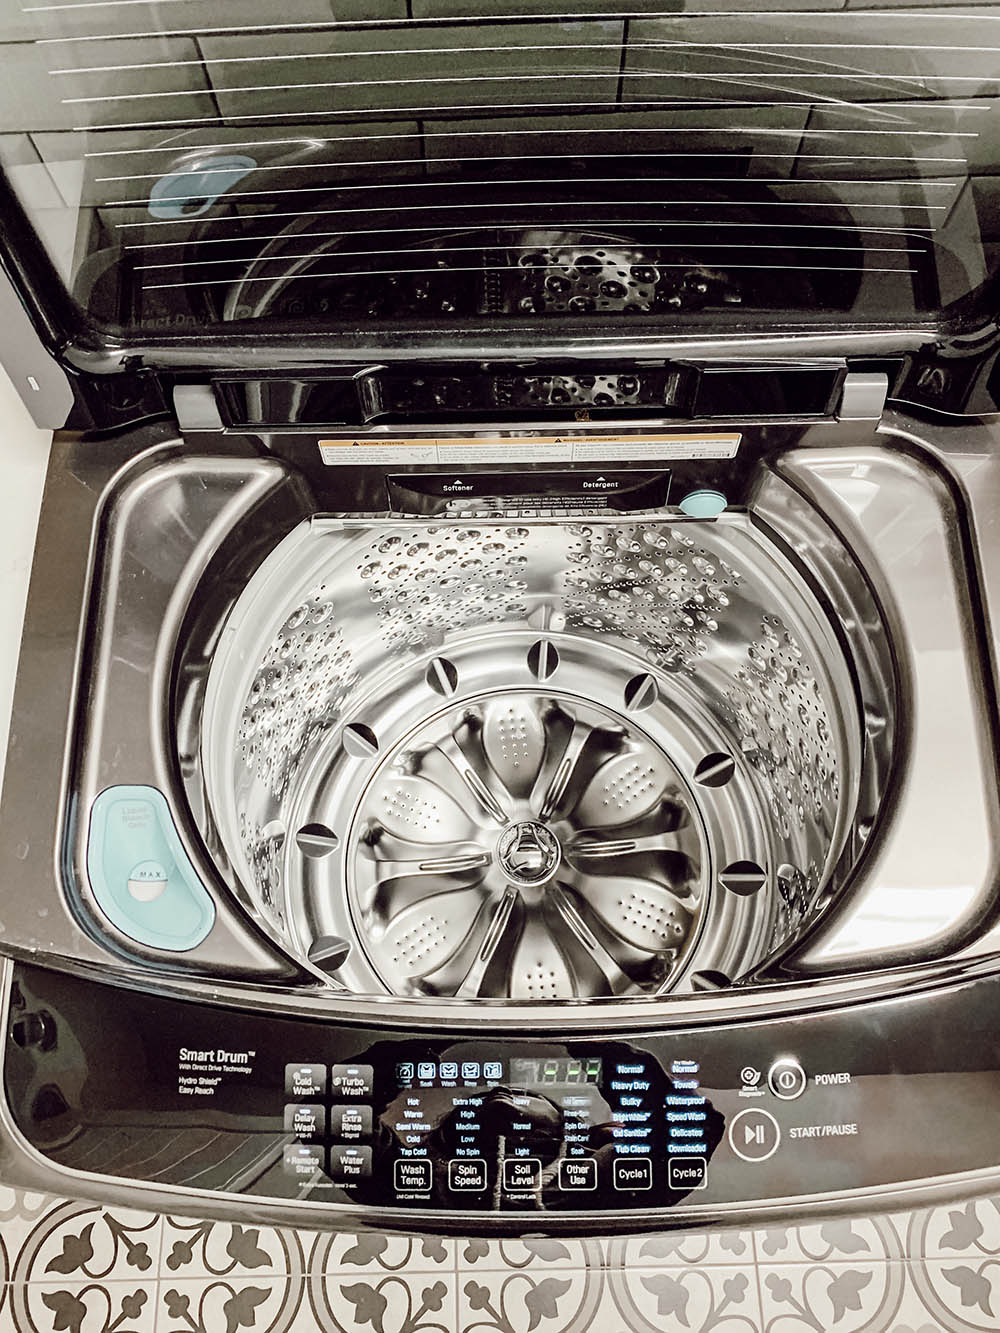 The inside of LG Smart Electric Dryer.